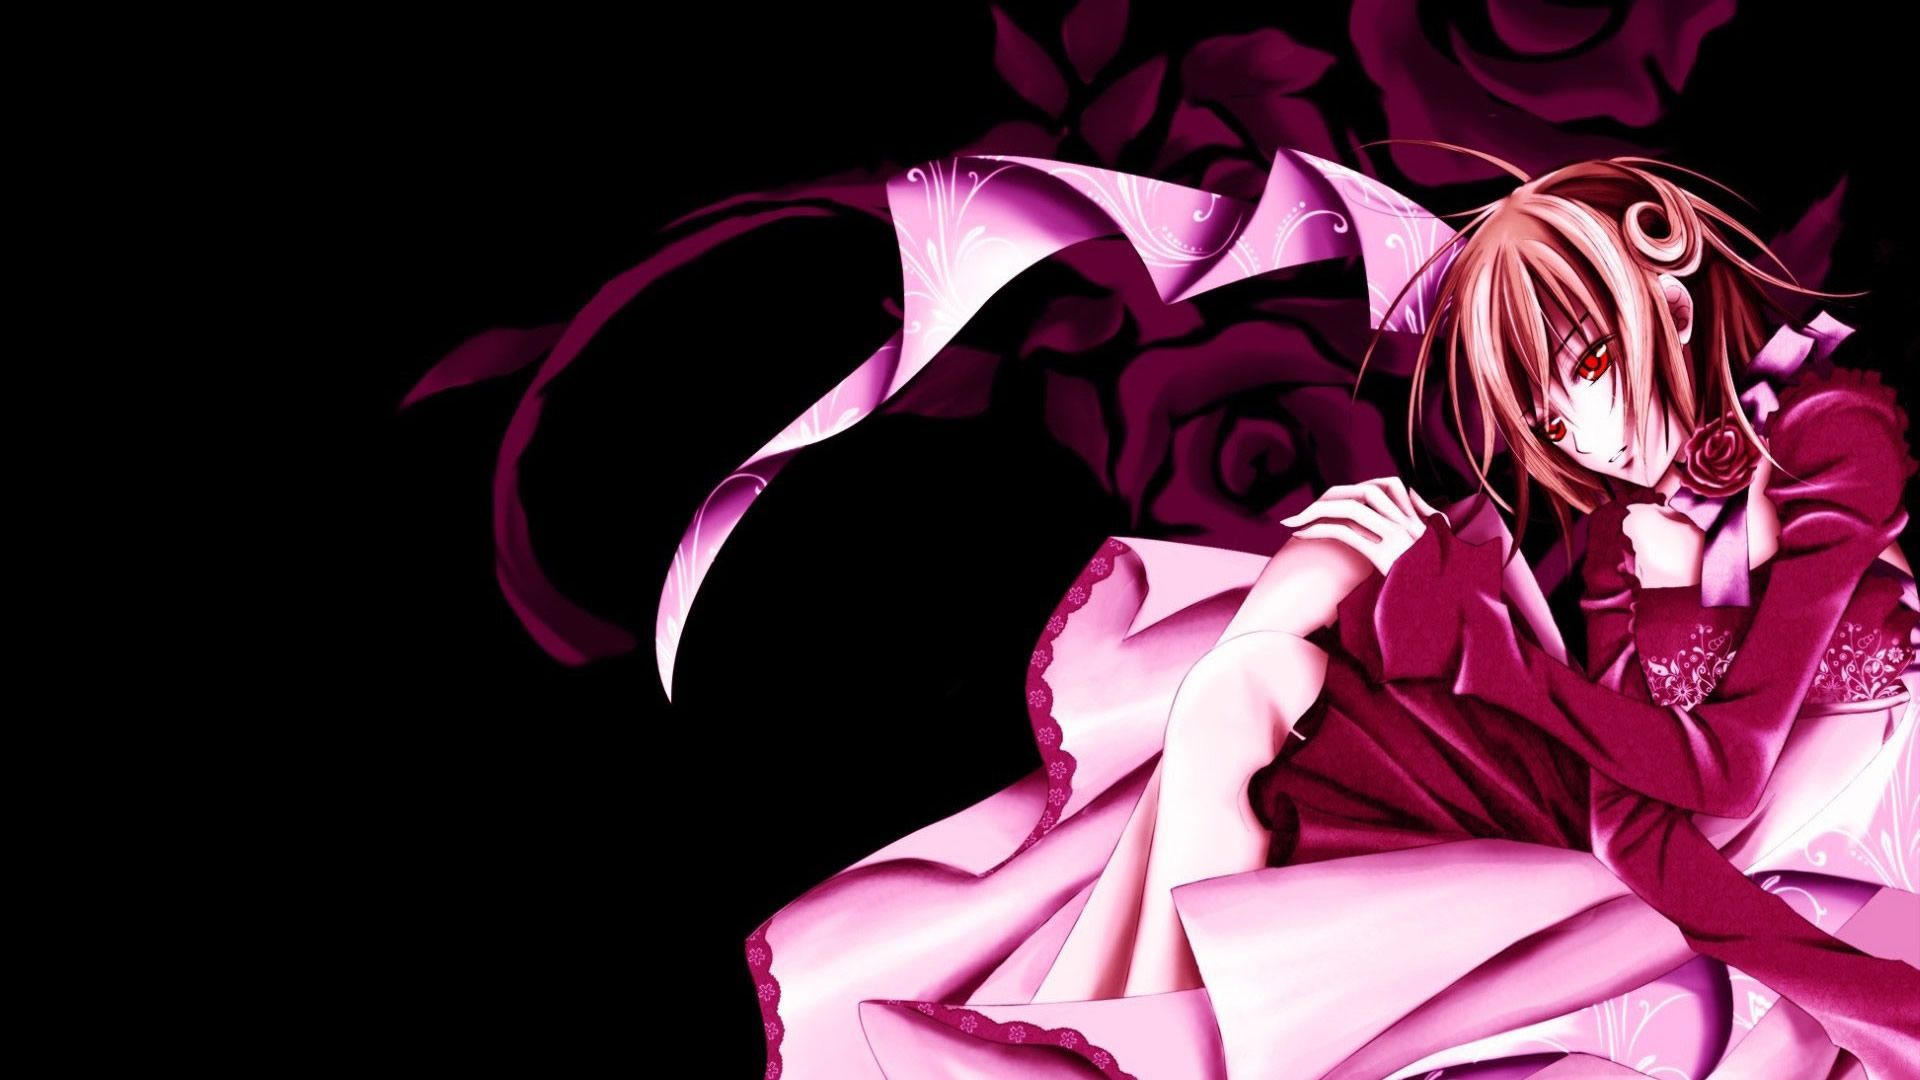 53 Awesome HD Anime Wallpapers for Your Desktop - High Definition ...